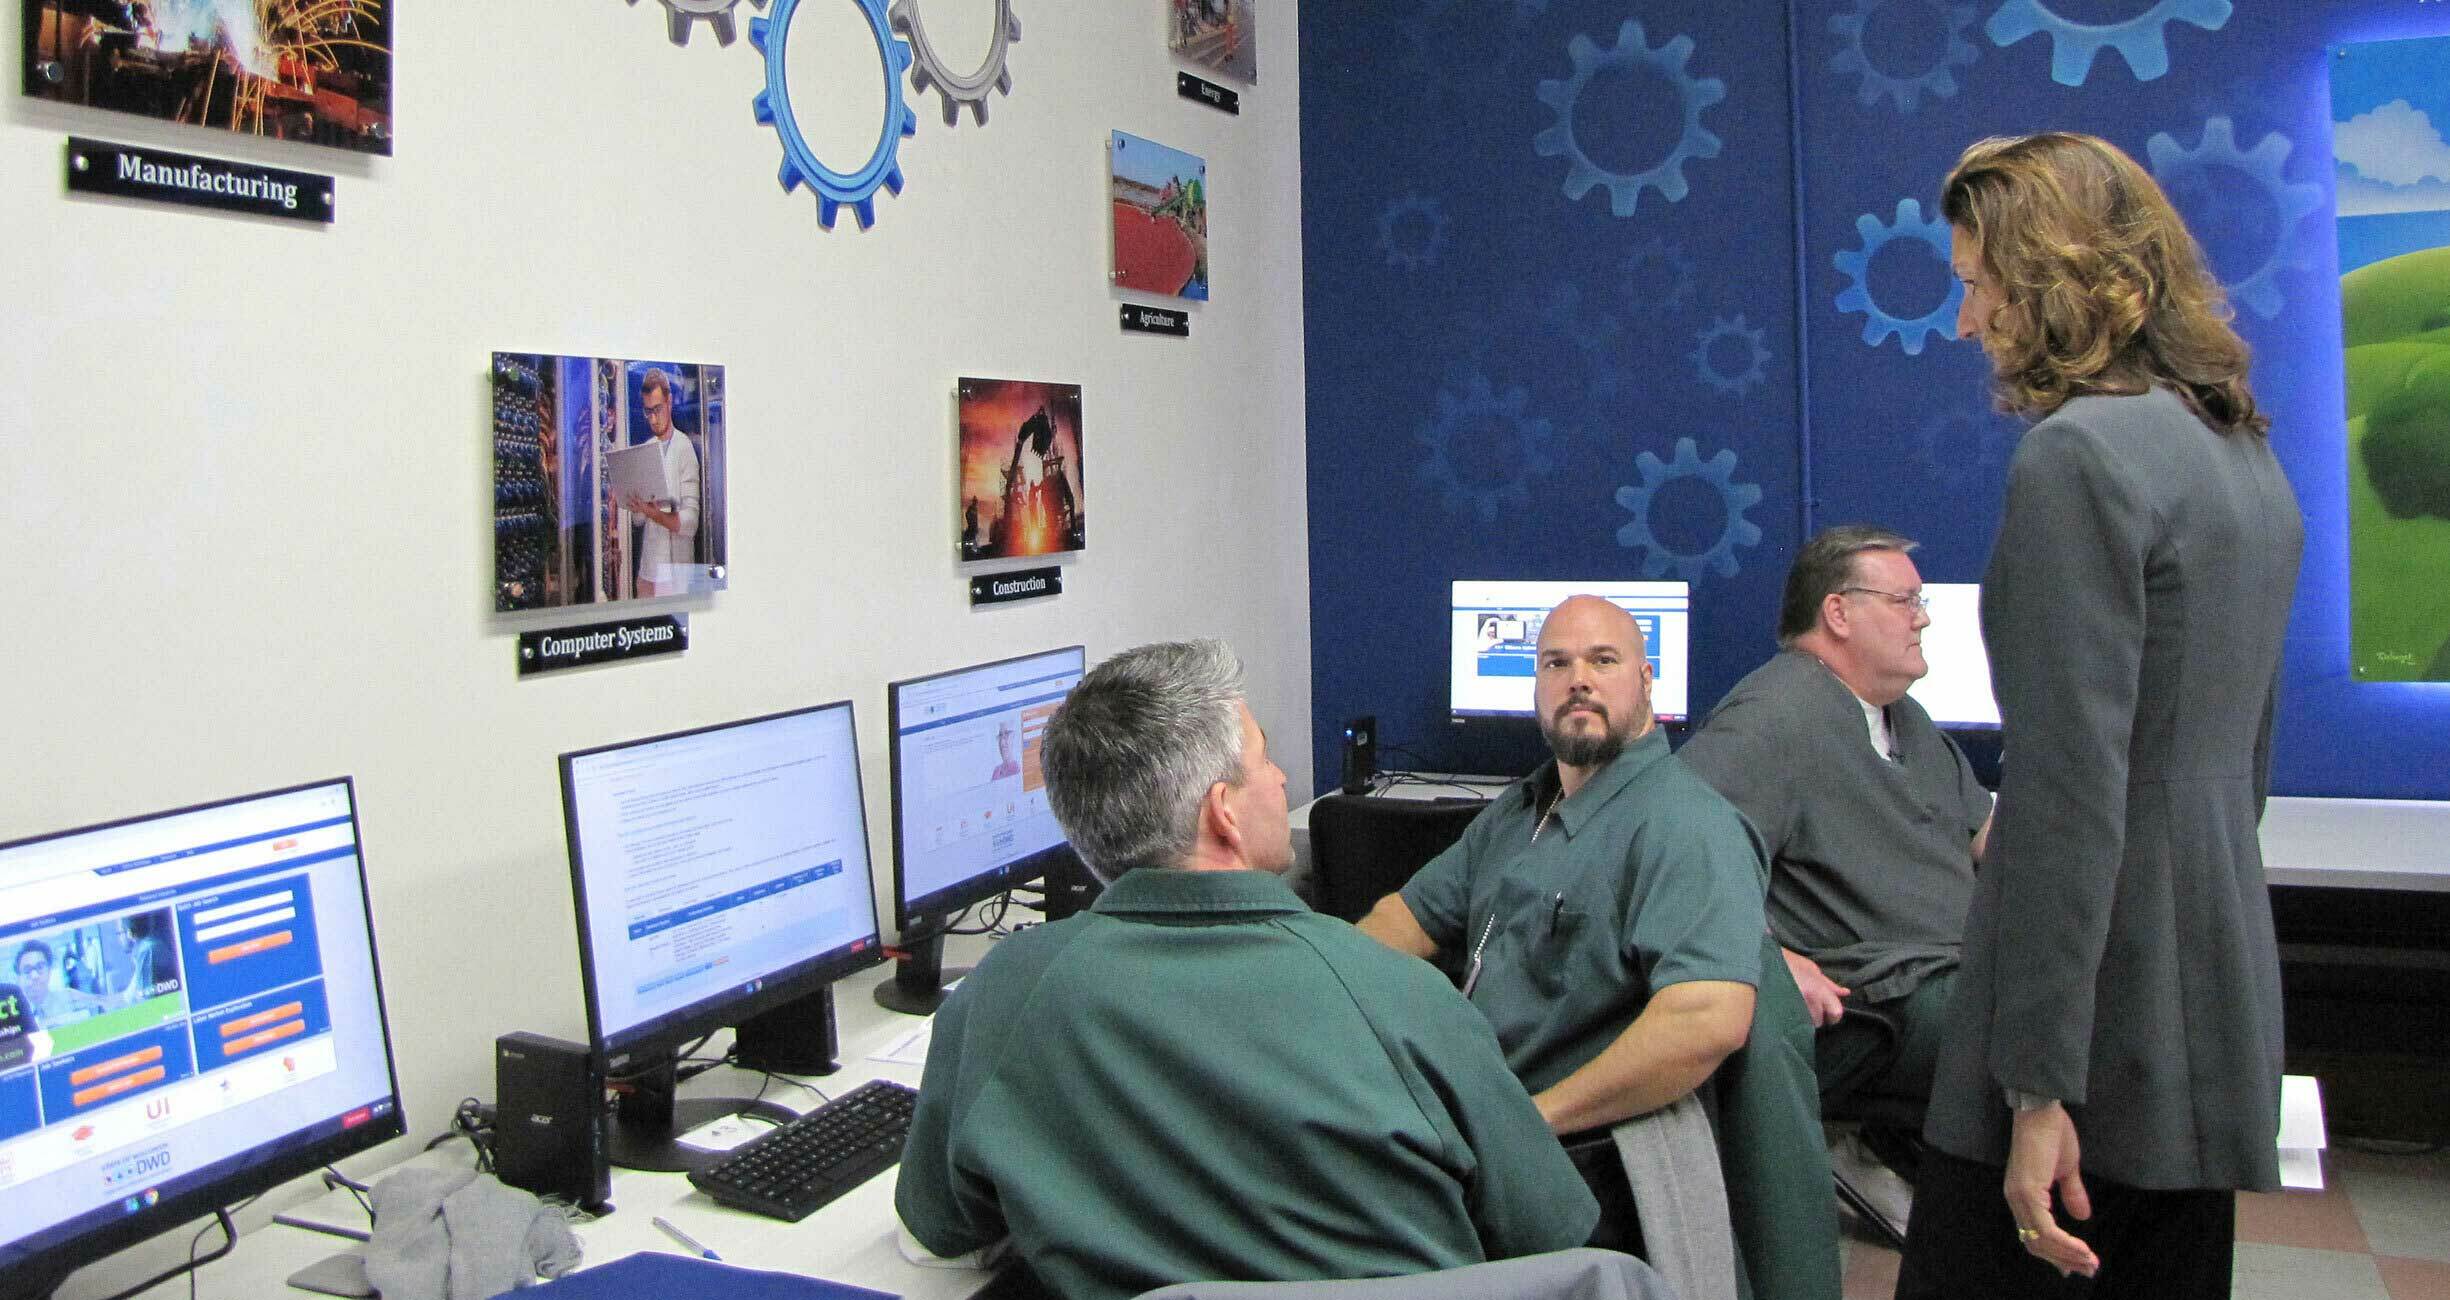 Men sitting at computers talking with a woman